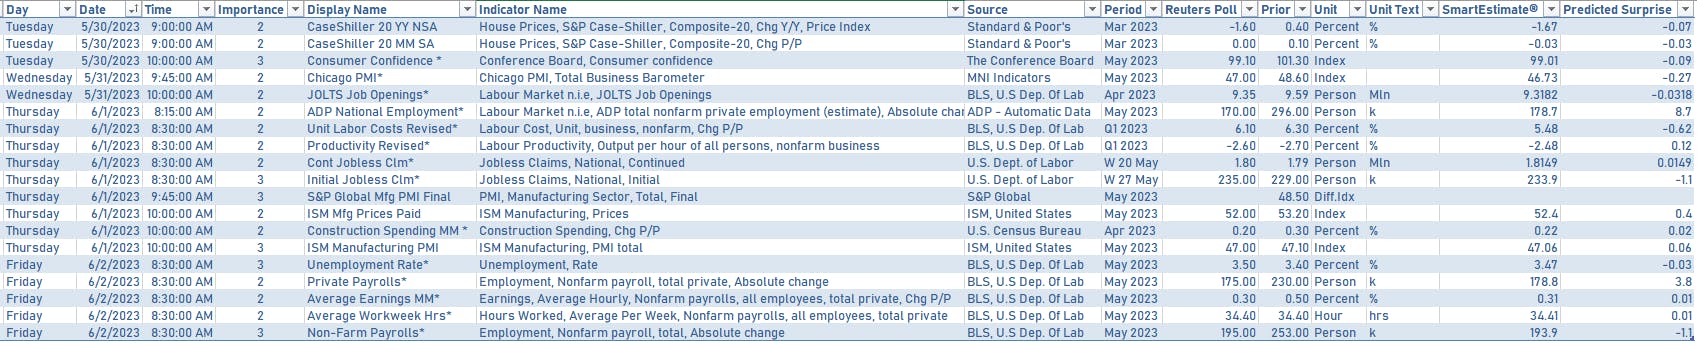 US economic data in the week ahead | Sources: phipost.com, Refinitiv data